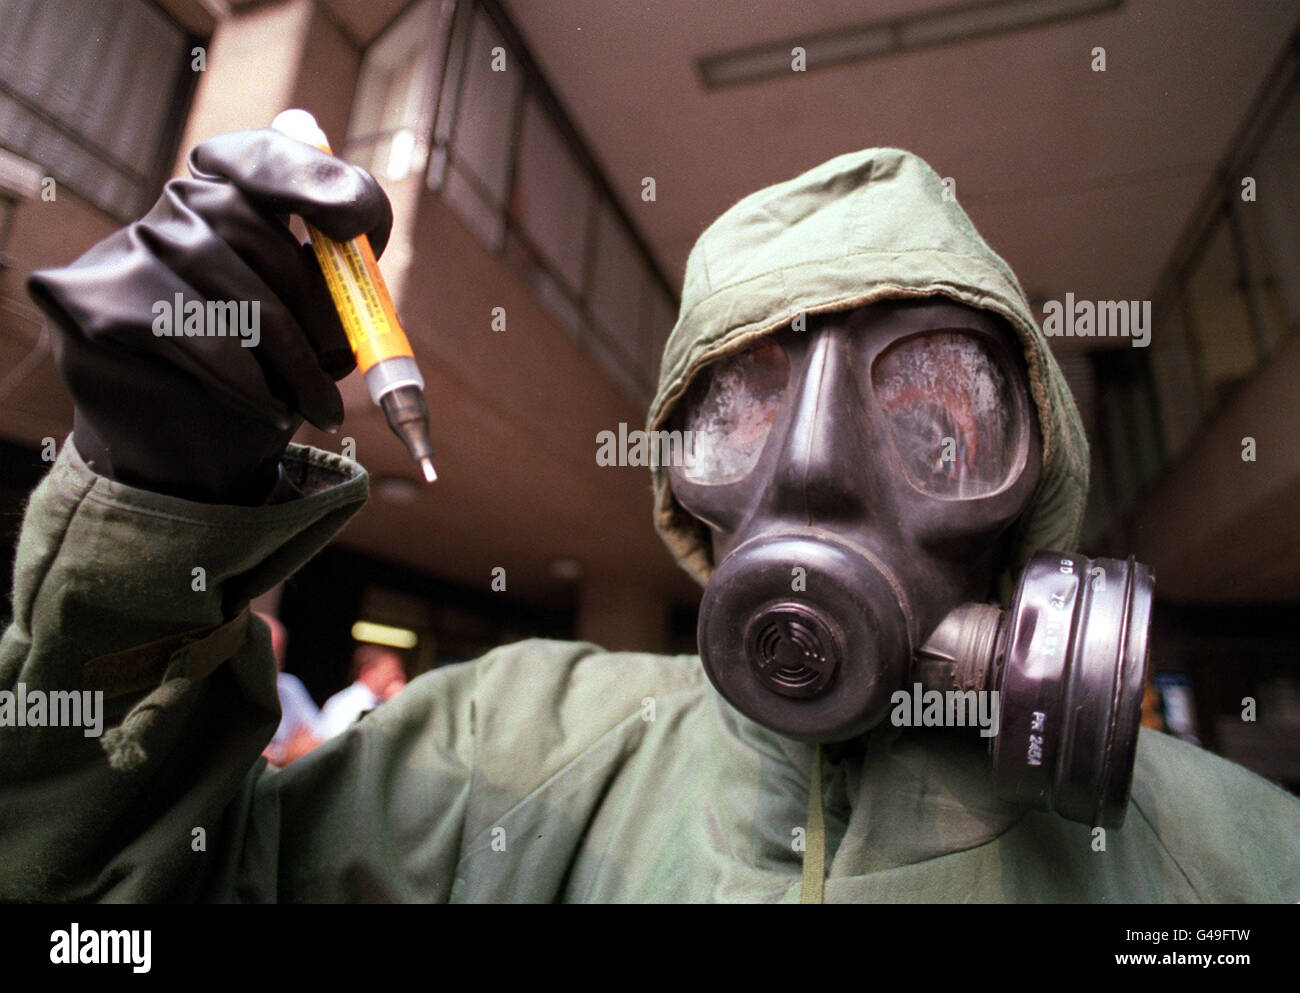 CHEMICAL AND BIOLOGICAL WARFARE EXPERT, DR ALISTAIR HAY, DRESSED IN A GAS MASK AND PROTECTIVE SUIT SIMILAR TO THOSE WORN BY BRITISH FORCES IN THE GULF. HE IS HOLDING THE DEVICE THAT THEY WOULD USE TO INJECT THEMSELVES WITH THE ANTIDOTE TO NERVE GAS. *25/09/2001....chemical and biological warfare expert Dr Alistair Hay, dressed in a a gas mask, and protective suit, holding a device to inject nerve gas antidote. It has emerged Tuesday September 25, 2001, that the World Health Organisation has warned governments to be alert to the risk of chemical or biological attacks. The organisation called Stock Photo